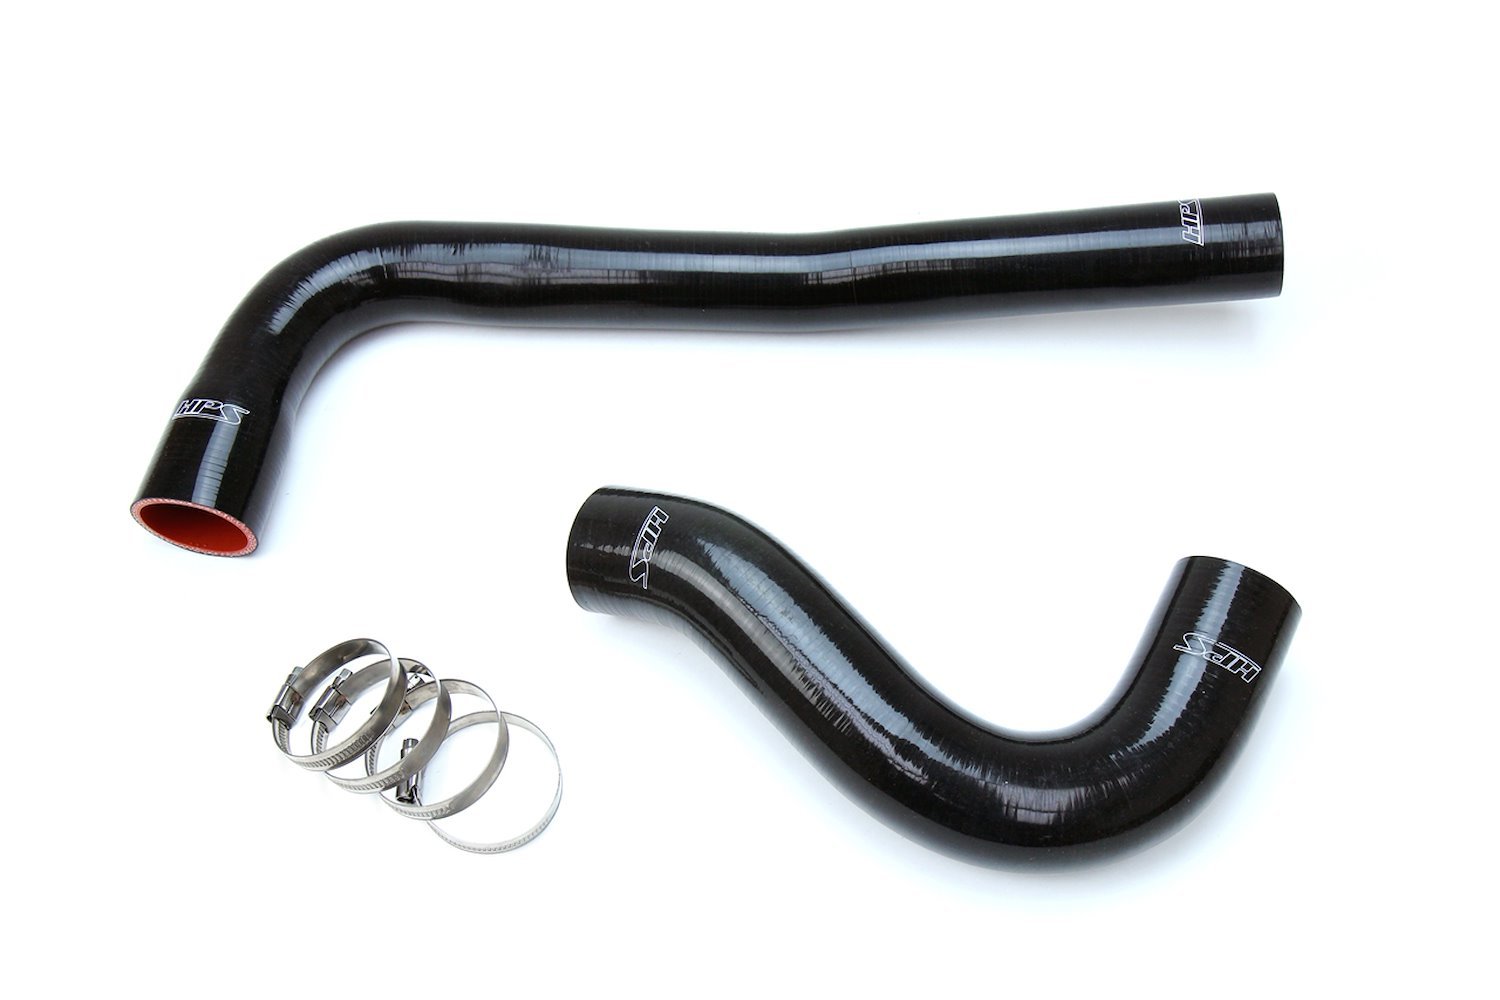 57-1322-BLK Radiator Hose Kit, High-Temp 3-Ply Reinforced Silicone, Replace OEM Rubber Radiator Coolant Hoses